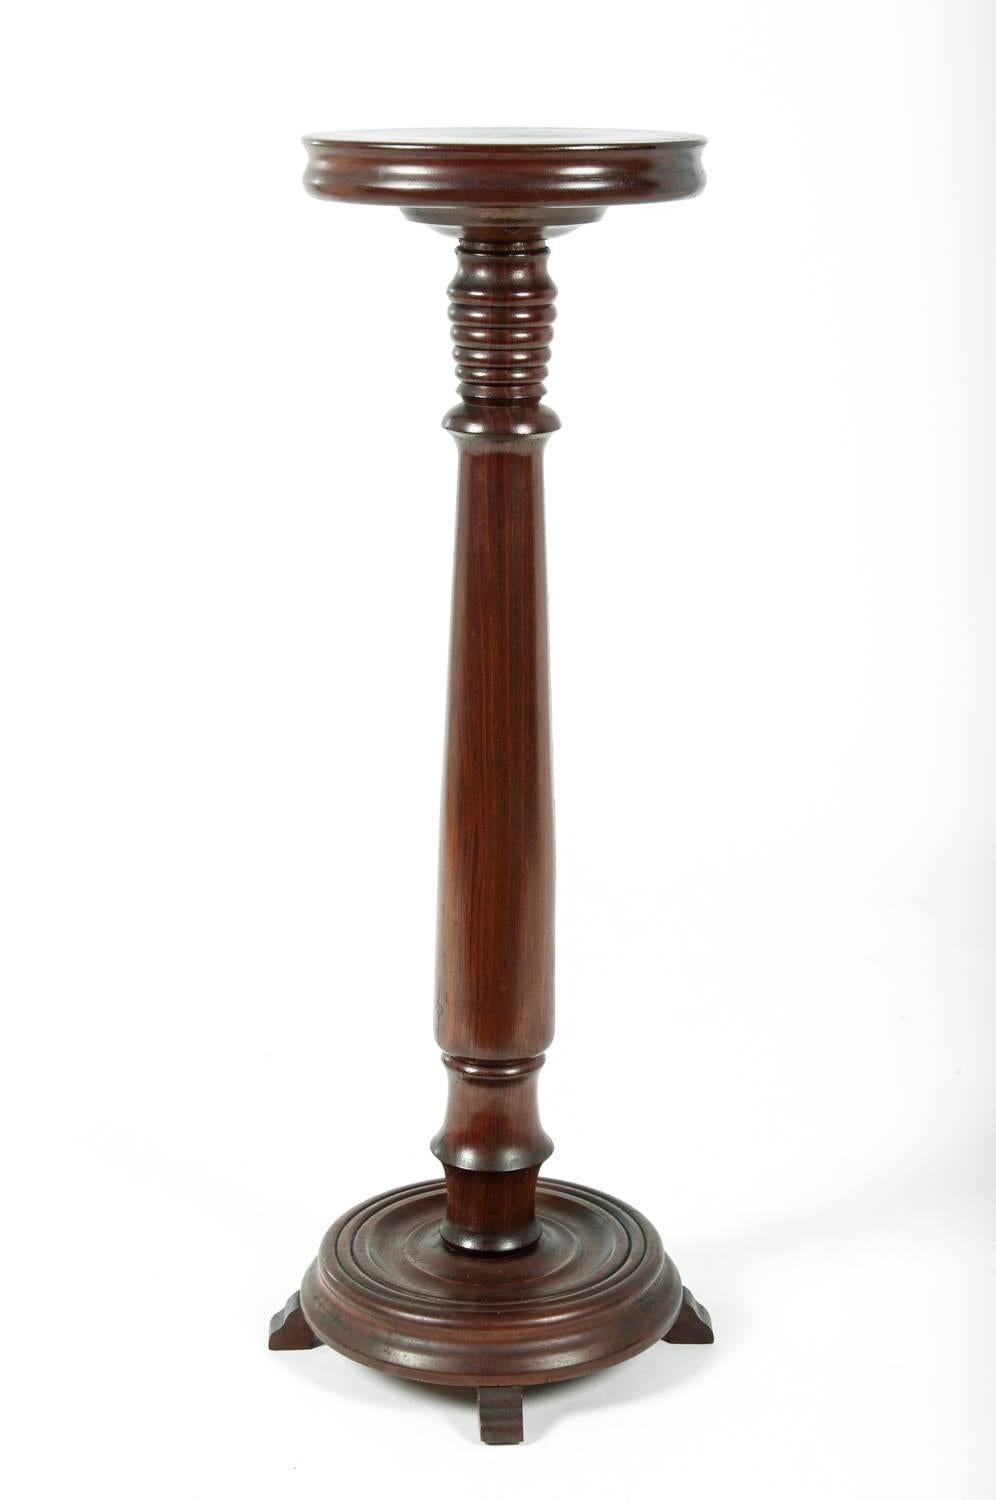 A vintage classic column form stand or pedestal table made of wood with carved and twisted top design. An excellent piece to display a sculpture, piece of art or a beautiful plant. The piece stand 10 inches top diameter x 33 inches high.